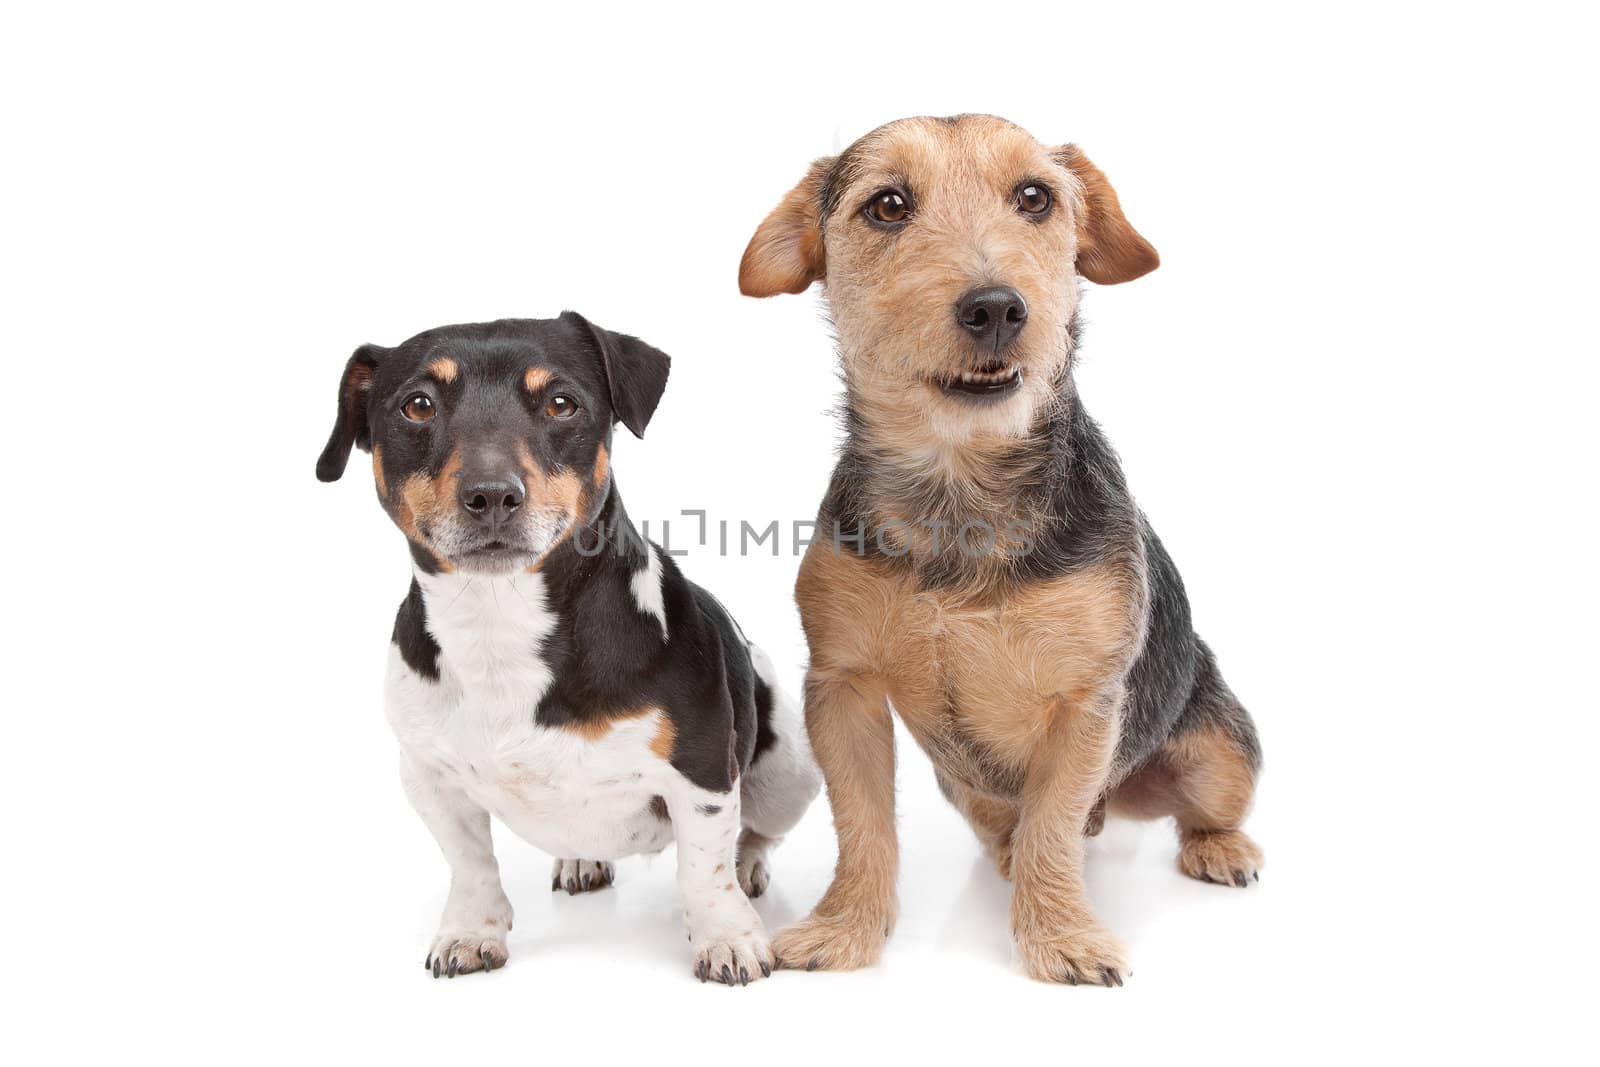 Jack Russel Terrier dog and a mixed breed dog in front of a white background